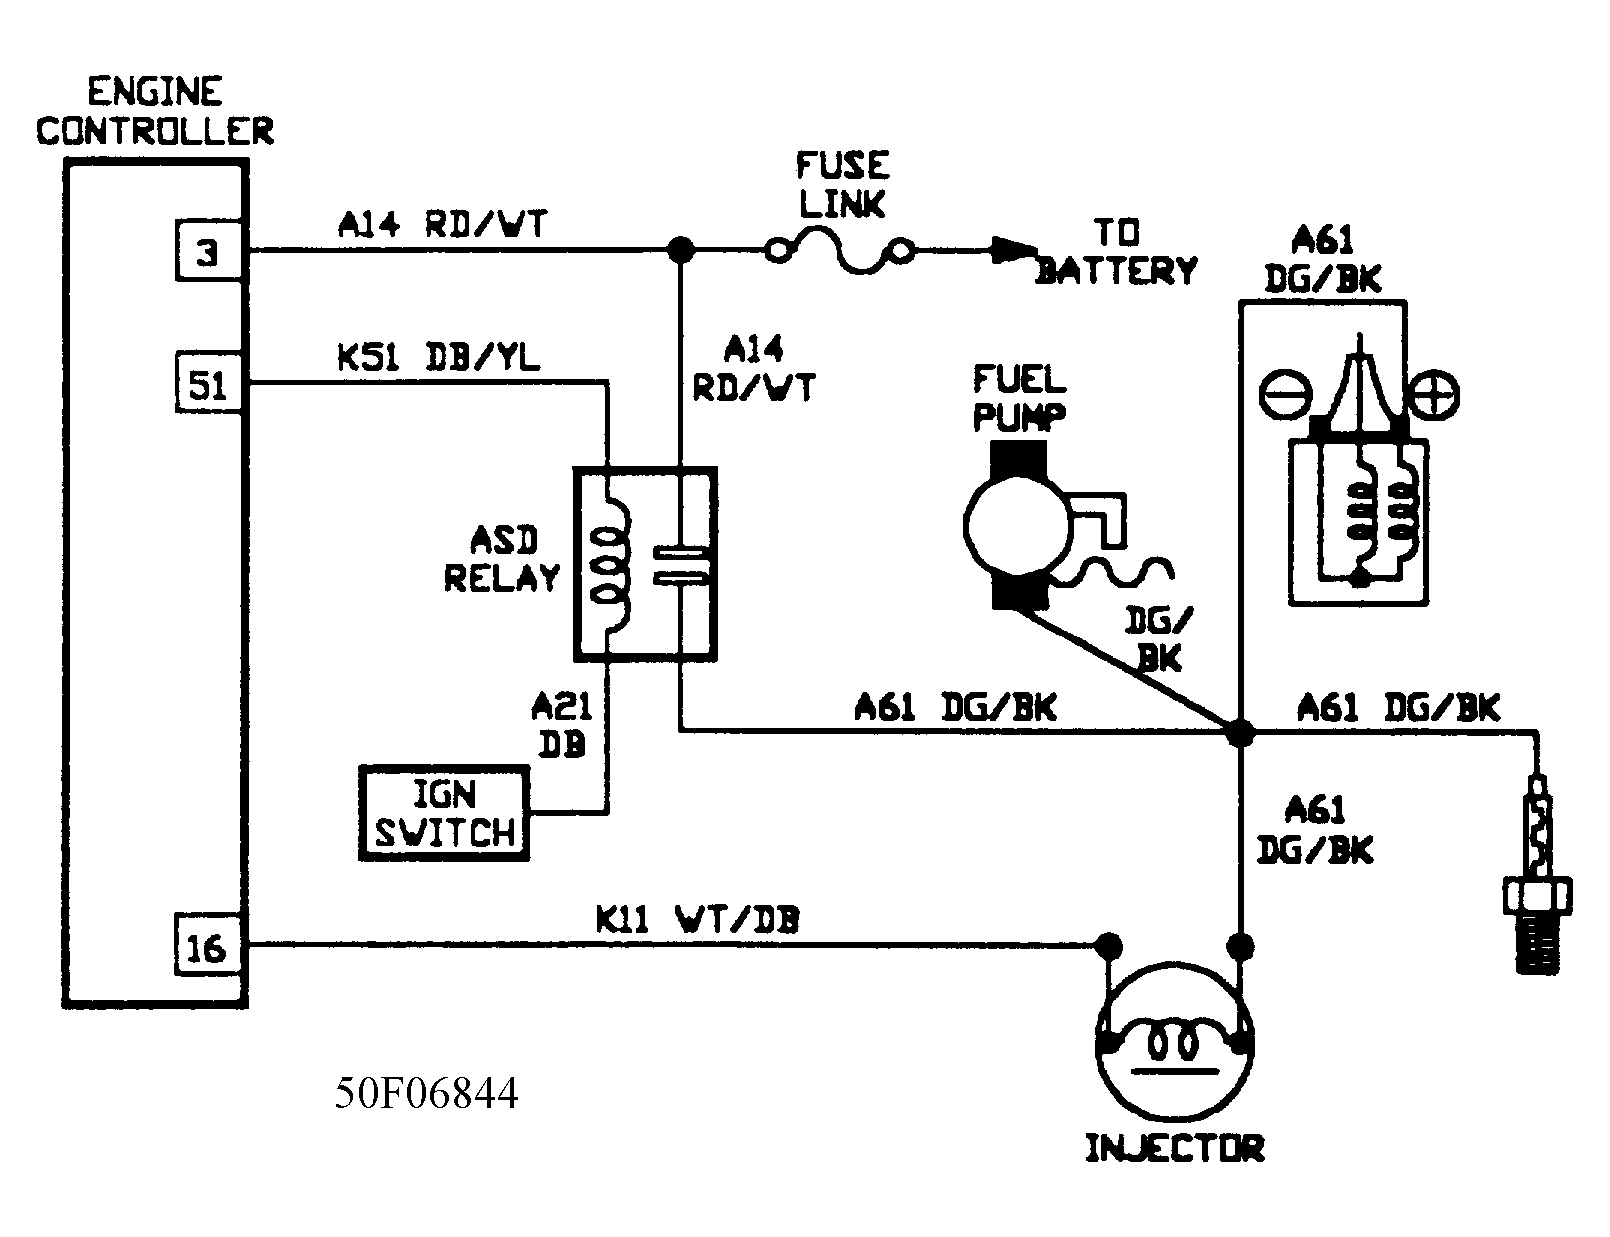 Chrysler LeBaron LX 1991 - Component Locations -  Test NS-1A, Circuit Diagram.